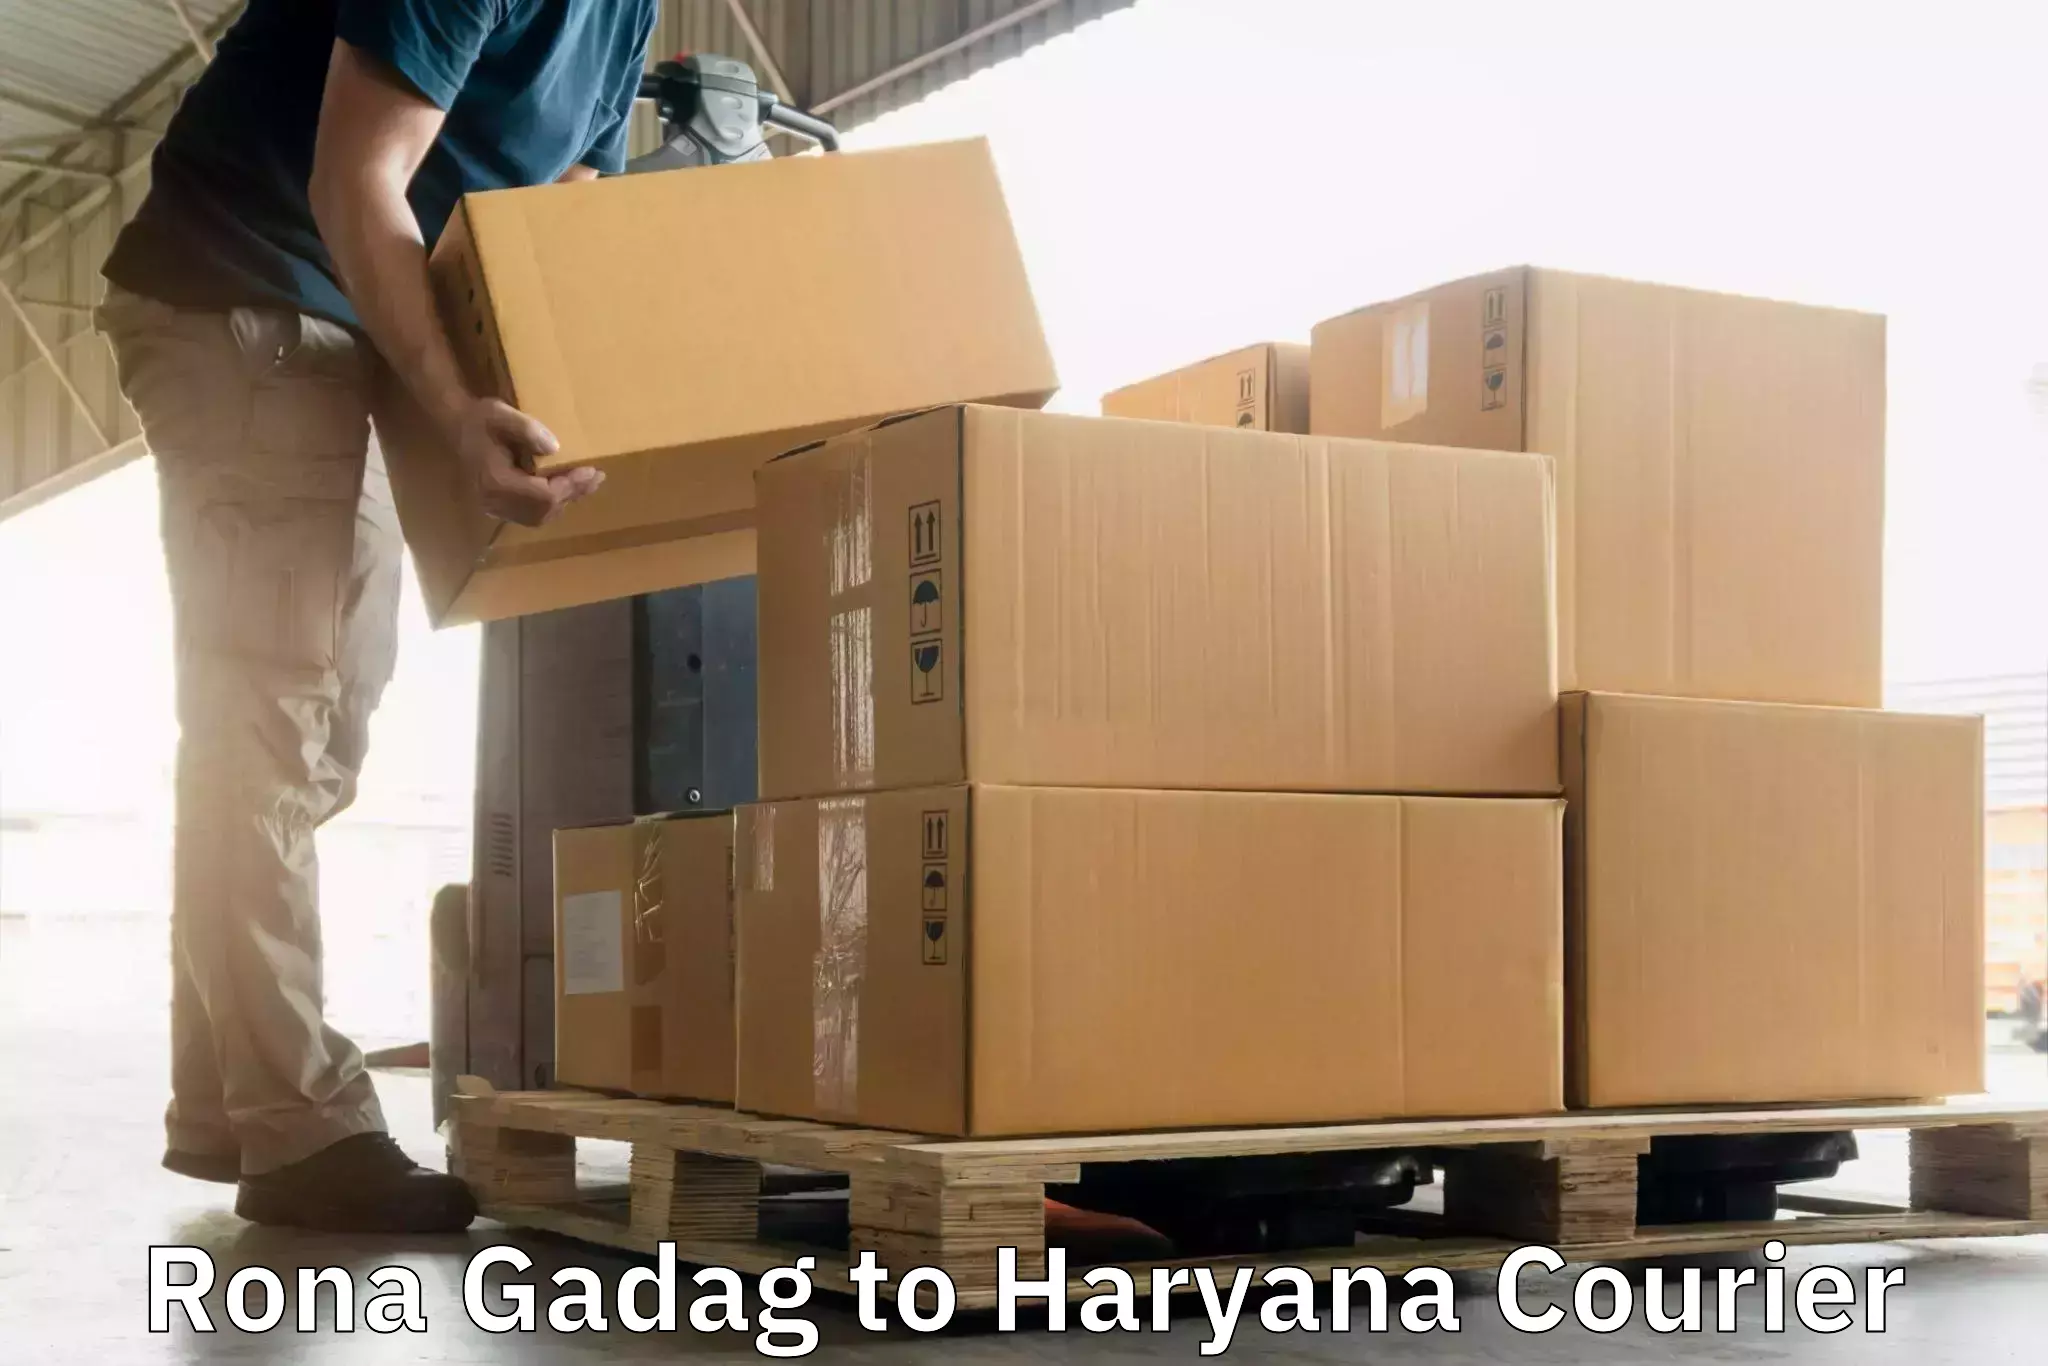 Personalized courier experiences Rona Gadag to Chaudhary Charan Singh Haryana Agricultural University Hisar